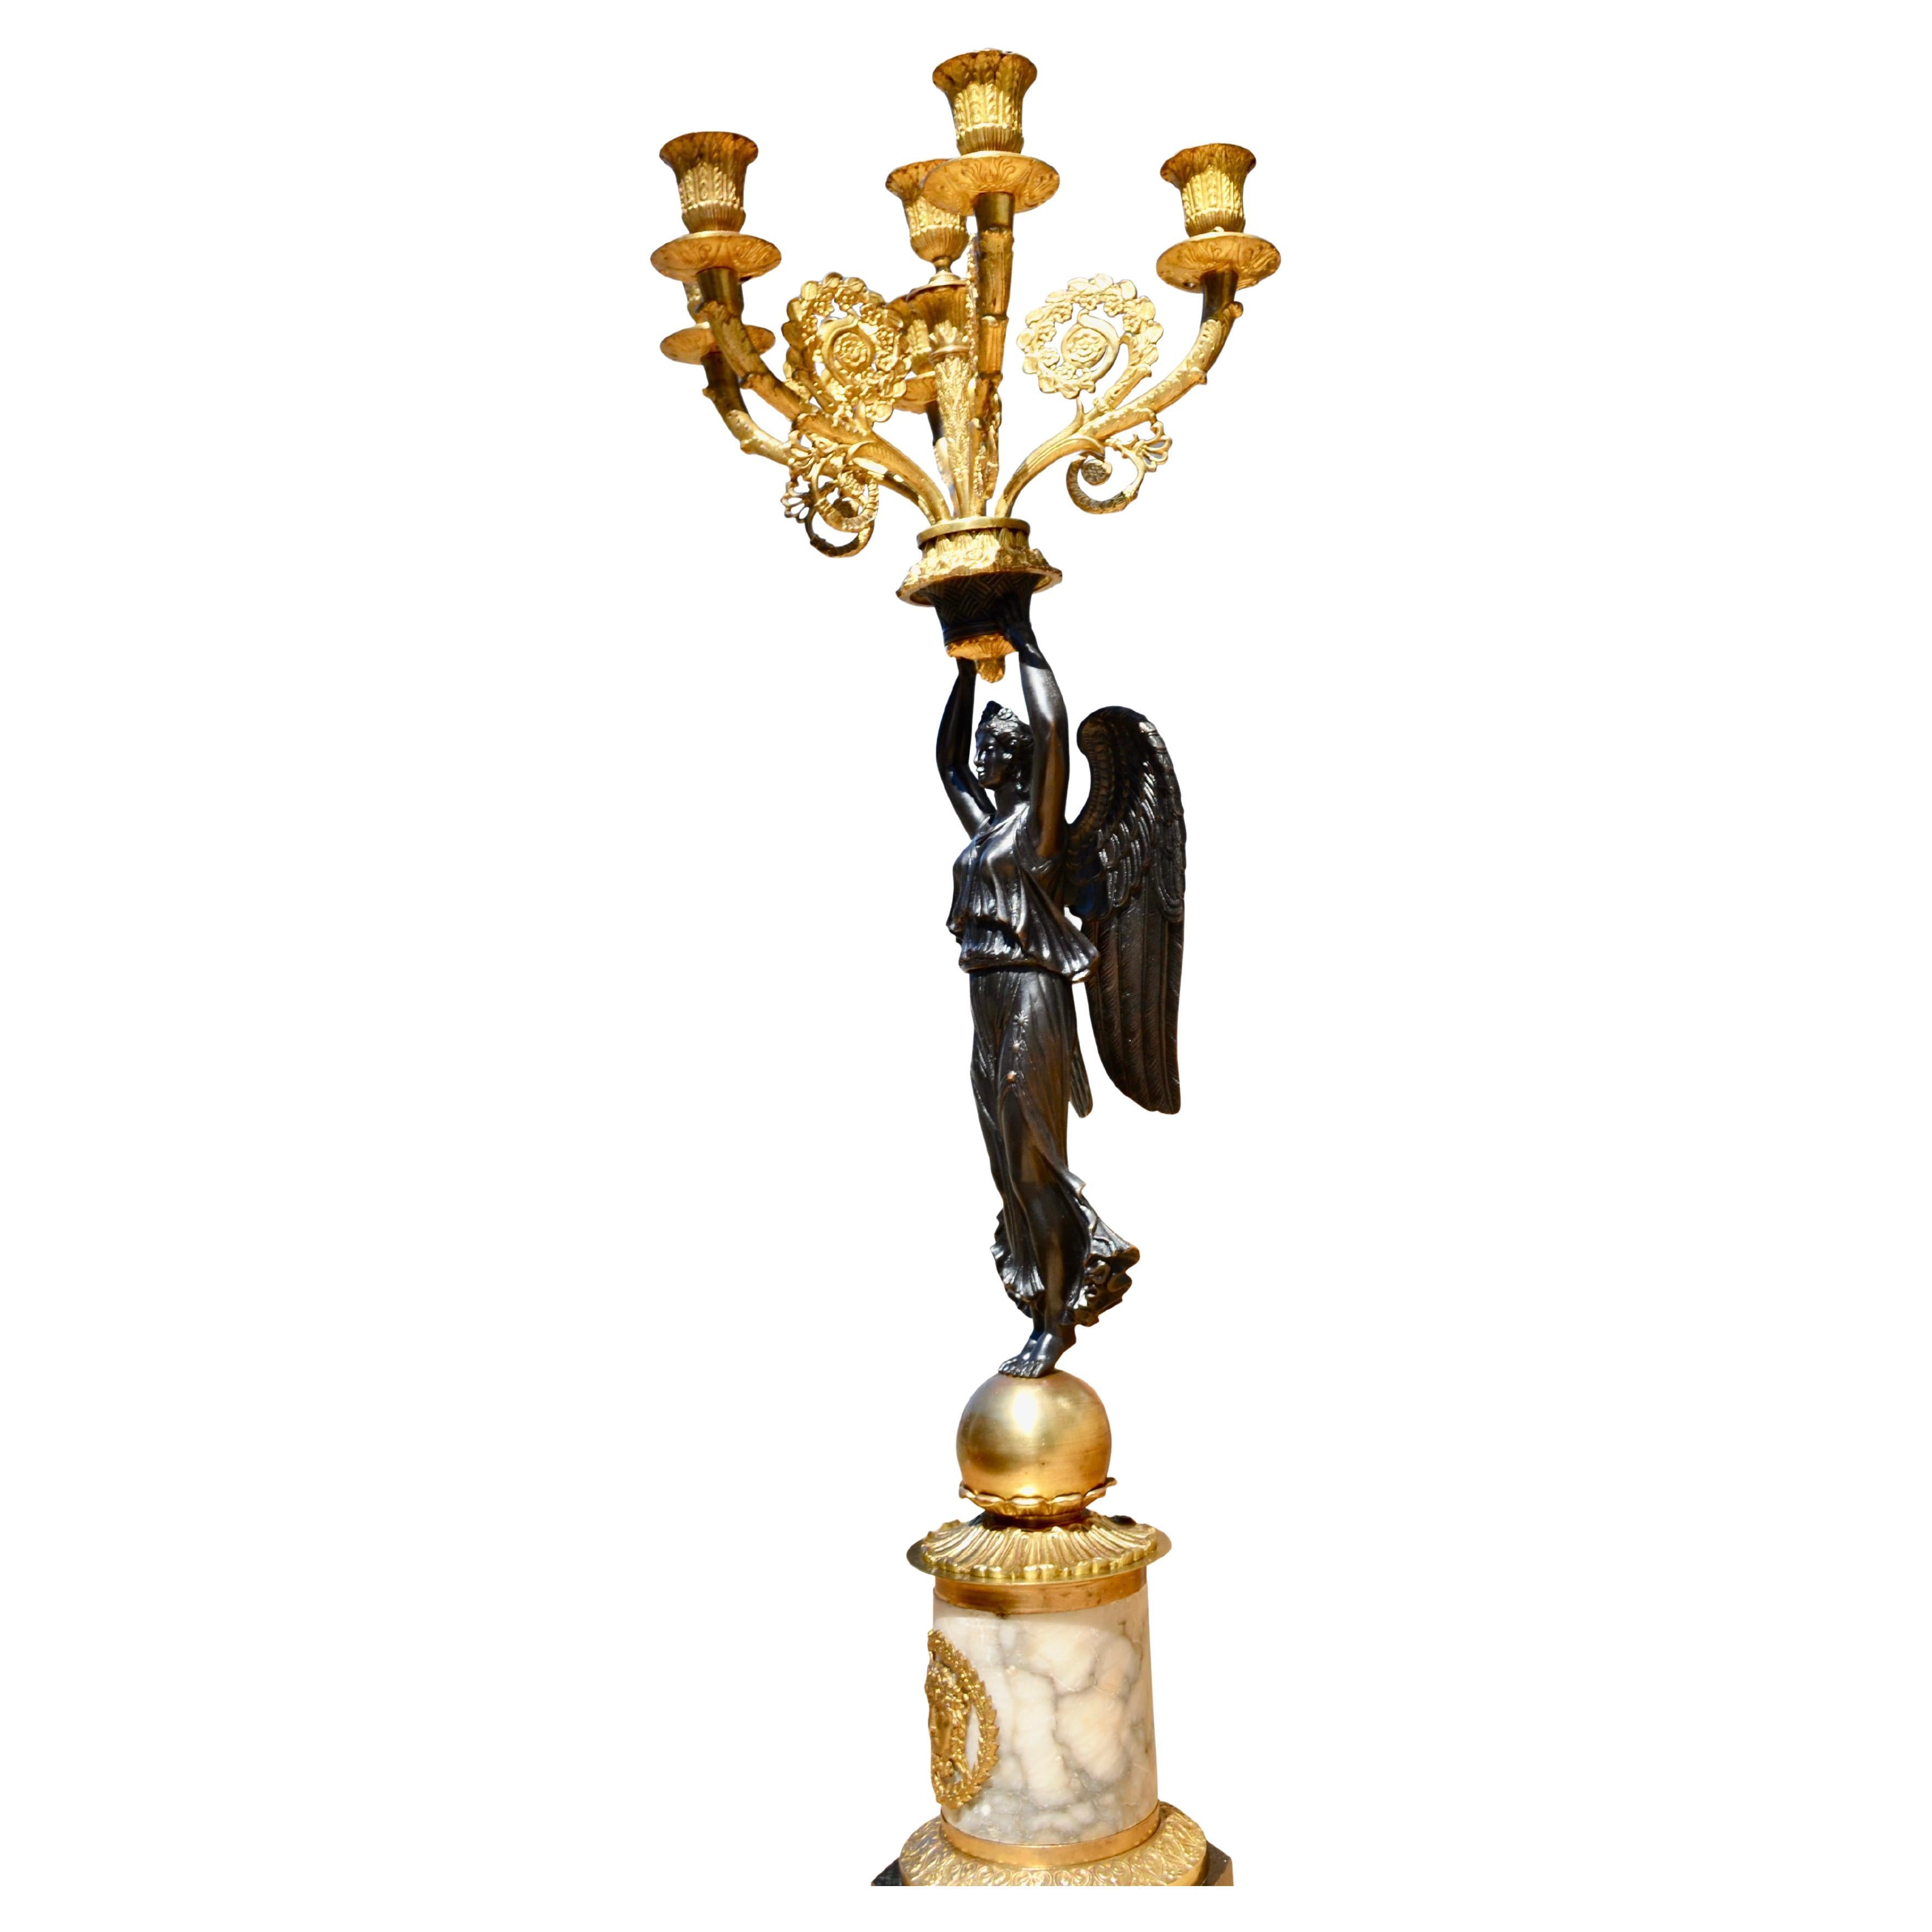 A mid to late 19thC French Empire style candelabra that at one time was electrified. A finely chased patinated winged Nike or Winged Victory stands on a gilt ball and holds aloft five gilt candle arms and a central candle stem, the whole resting on